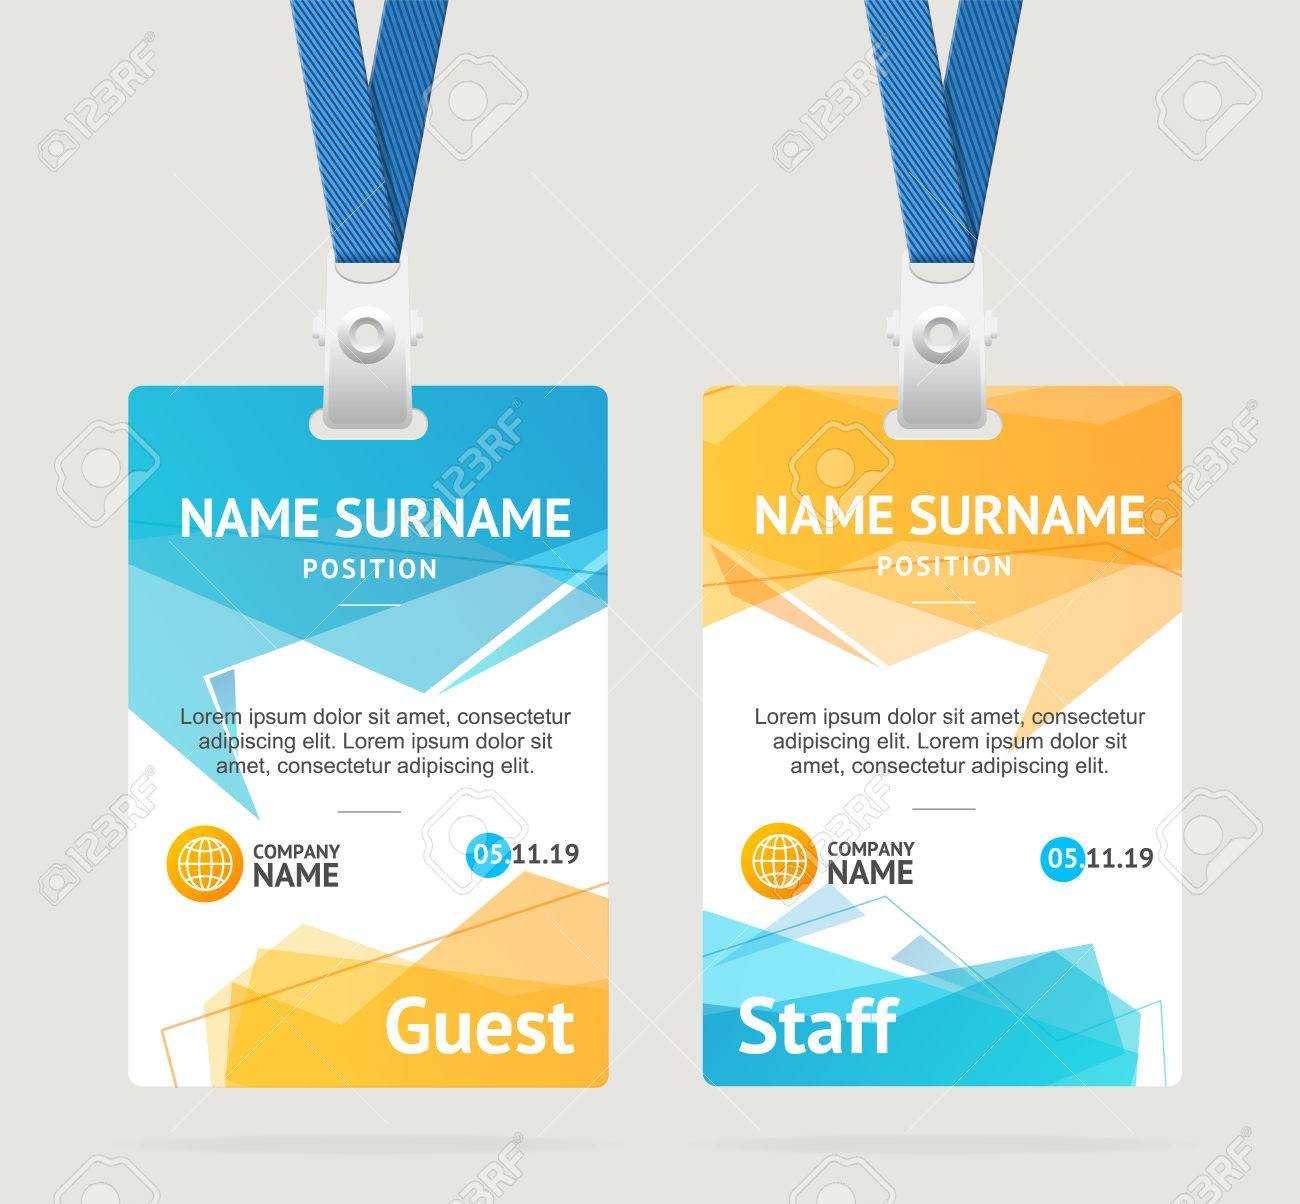 Id Card Template Plastic Badge. Vector Throughout Personal Identification Card Template